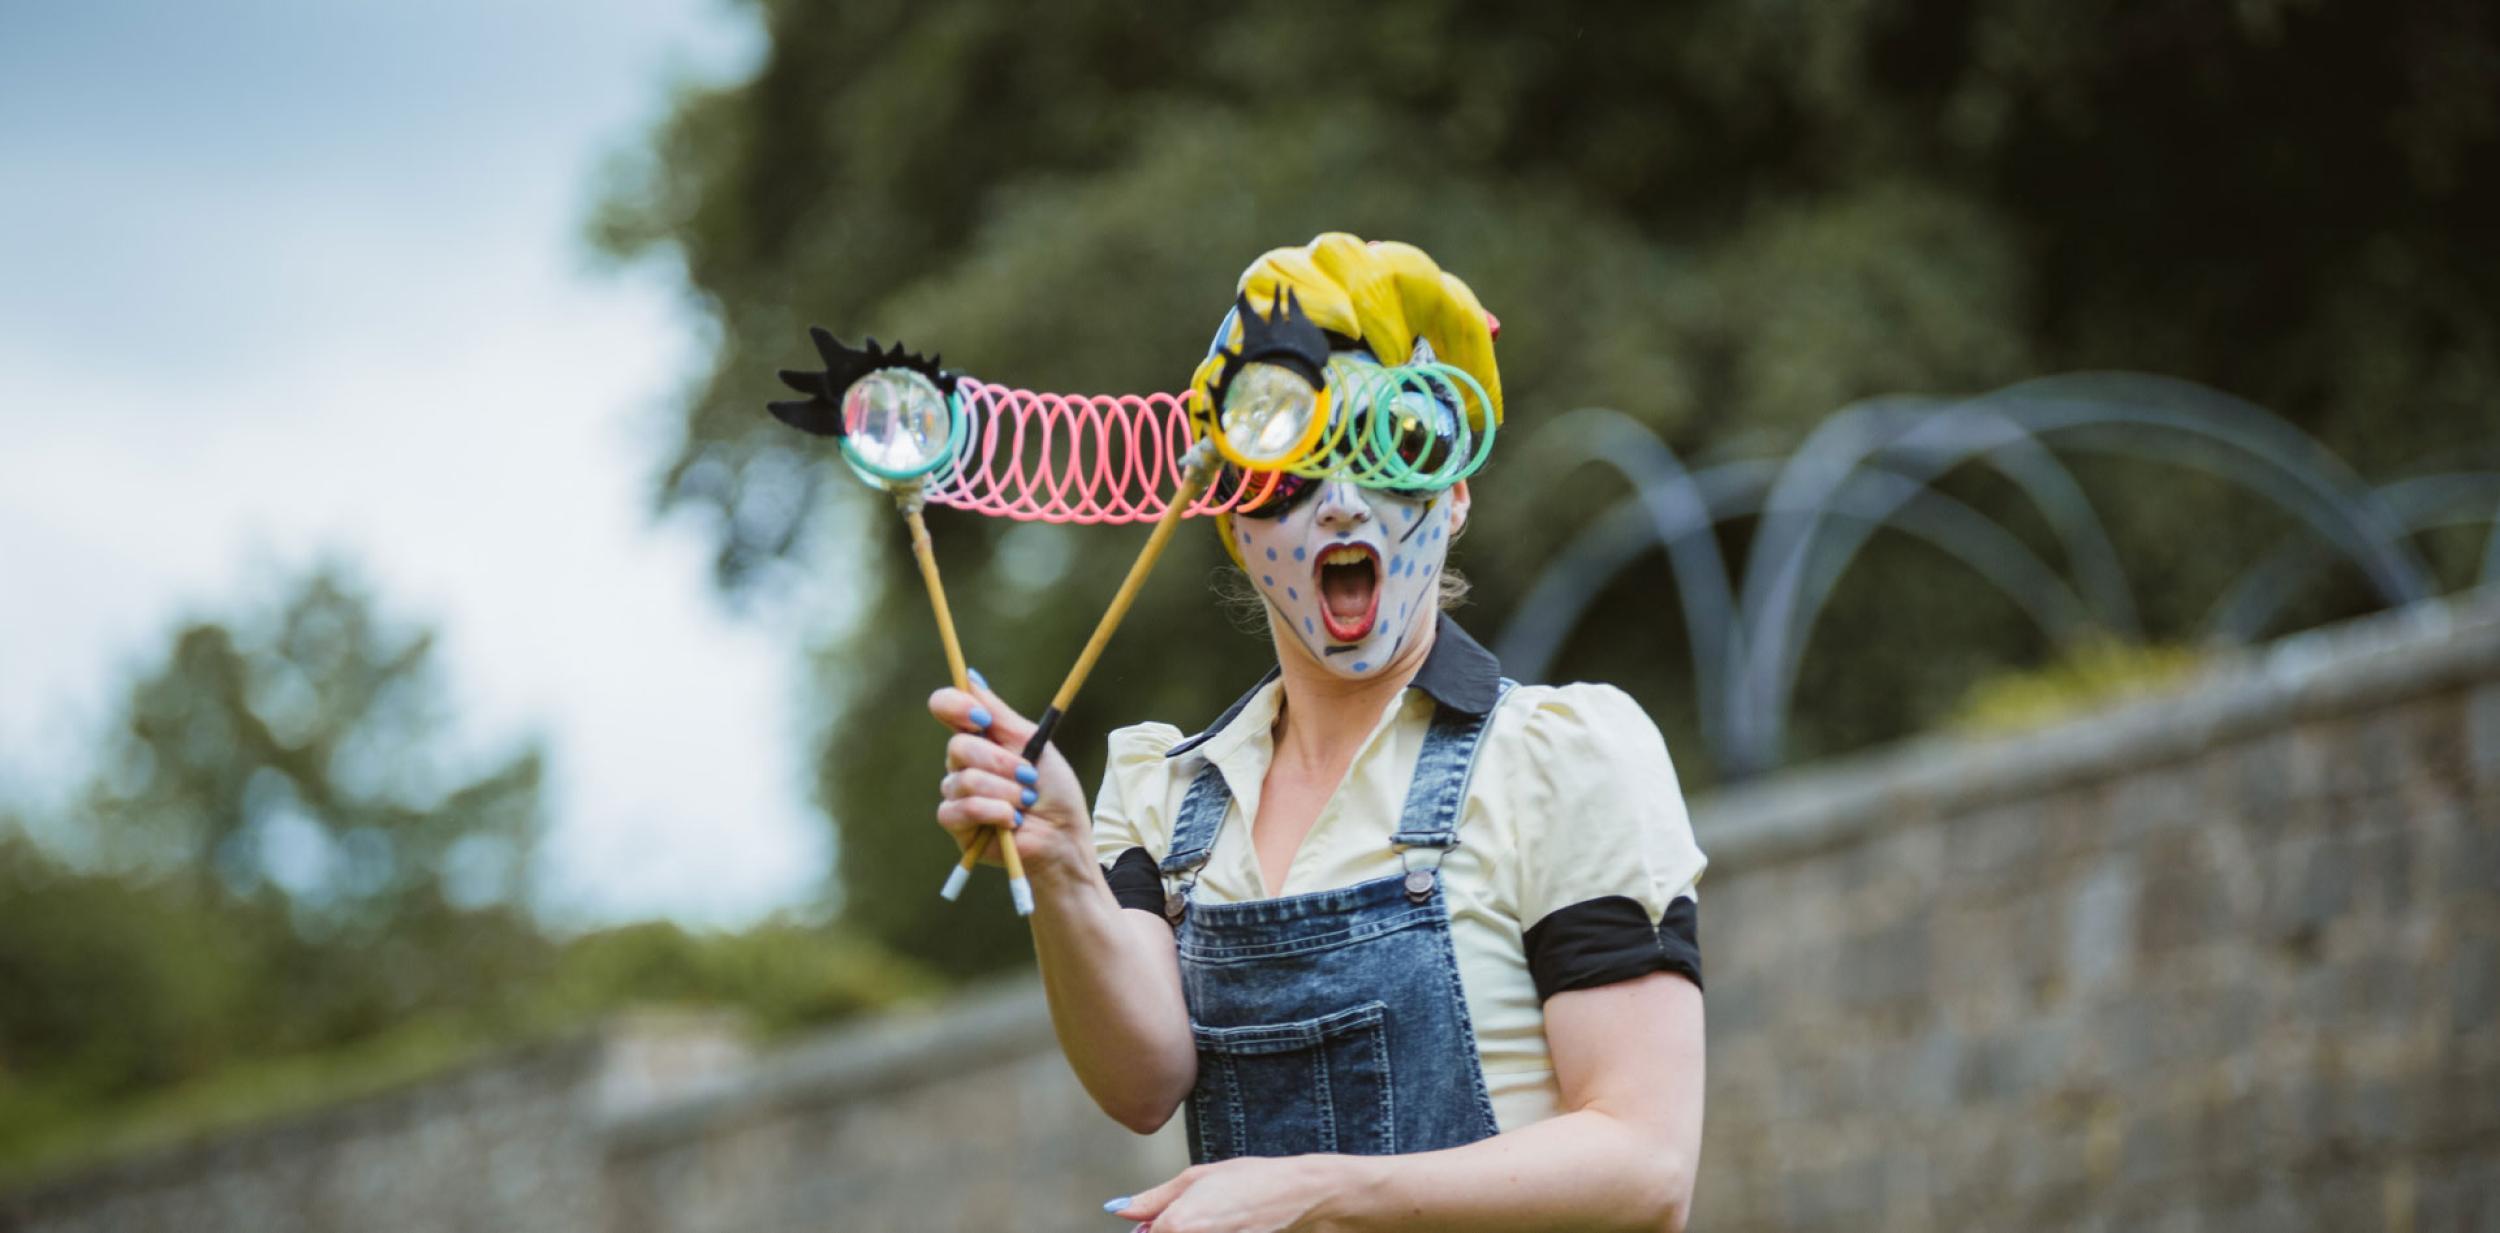 Performance at Hat Fair 2016 Out Door Arts festival. Lady with oversized googly eyed glasses and a surprised expression.